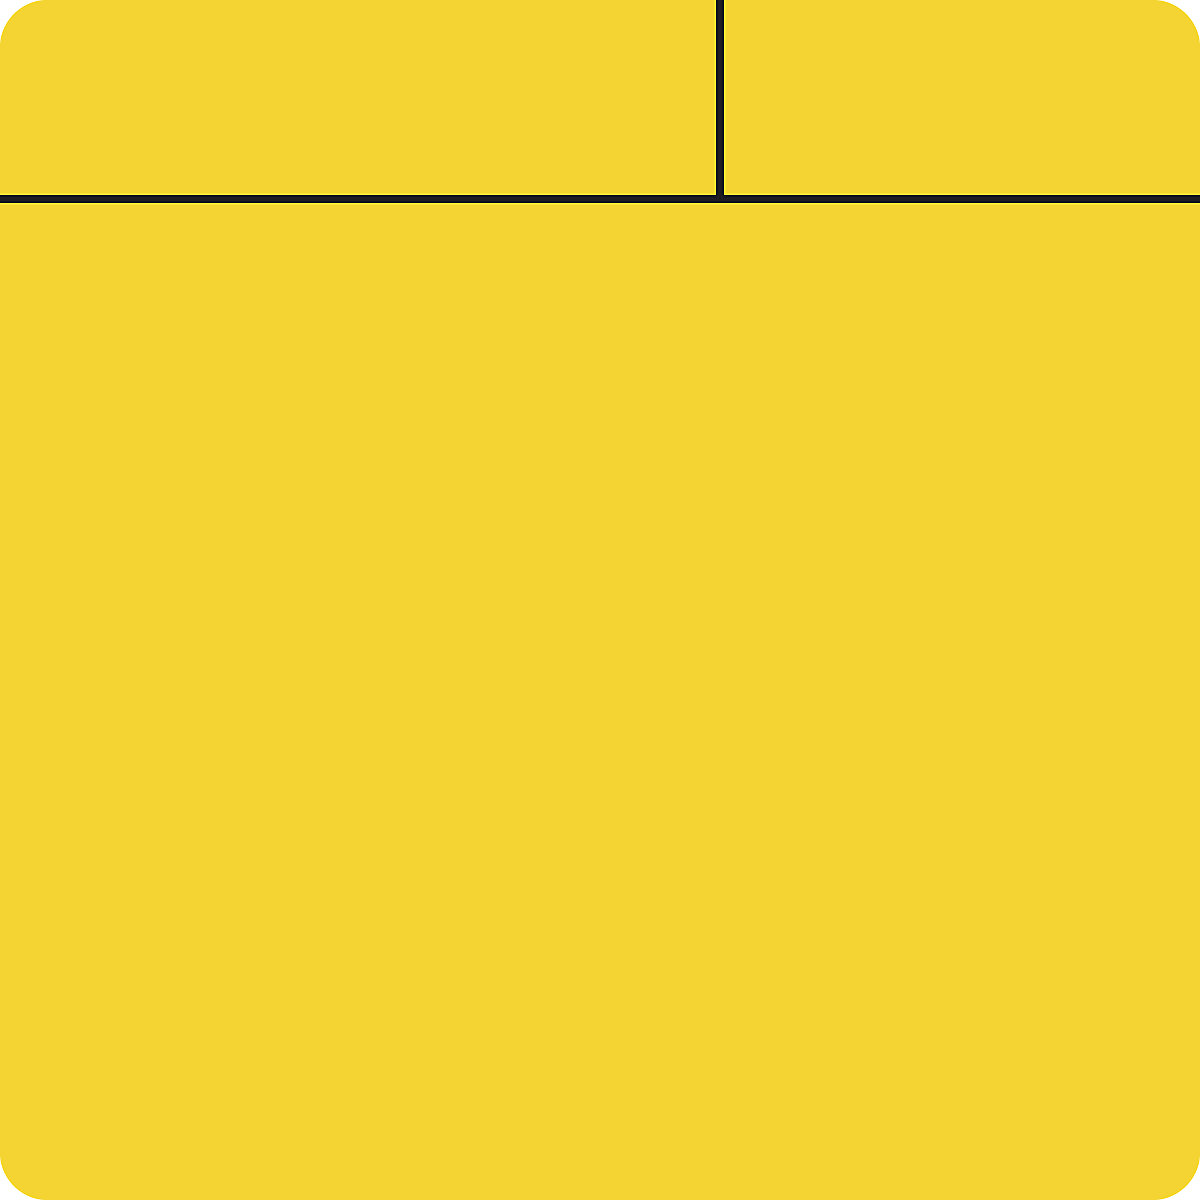 Post-it notes, magnetic, LxW 75 x 75 mm, pack of 10, yellow-10